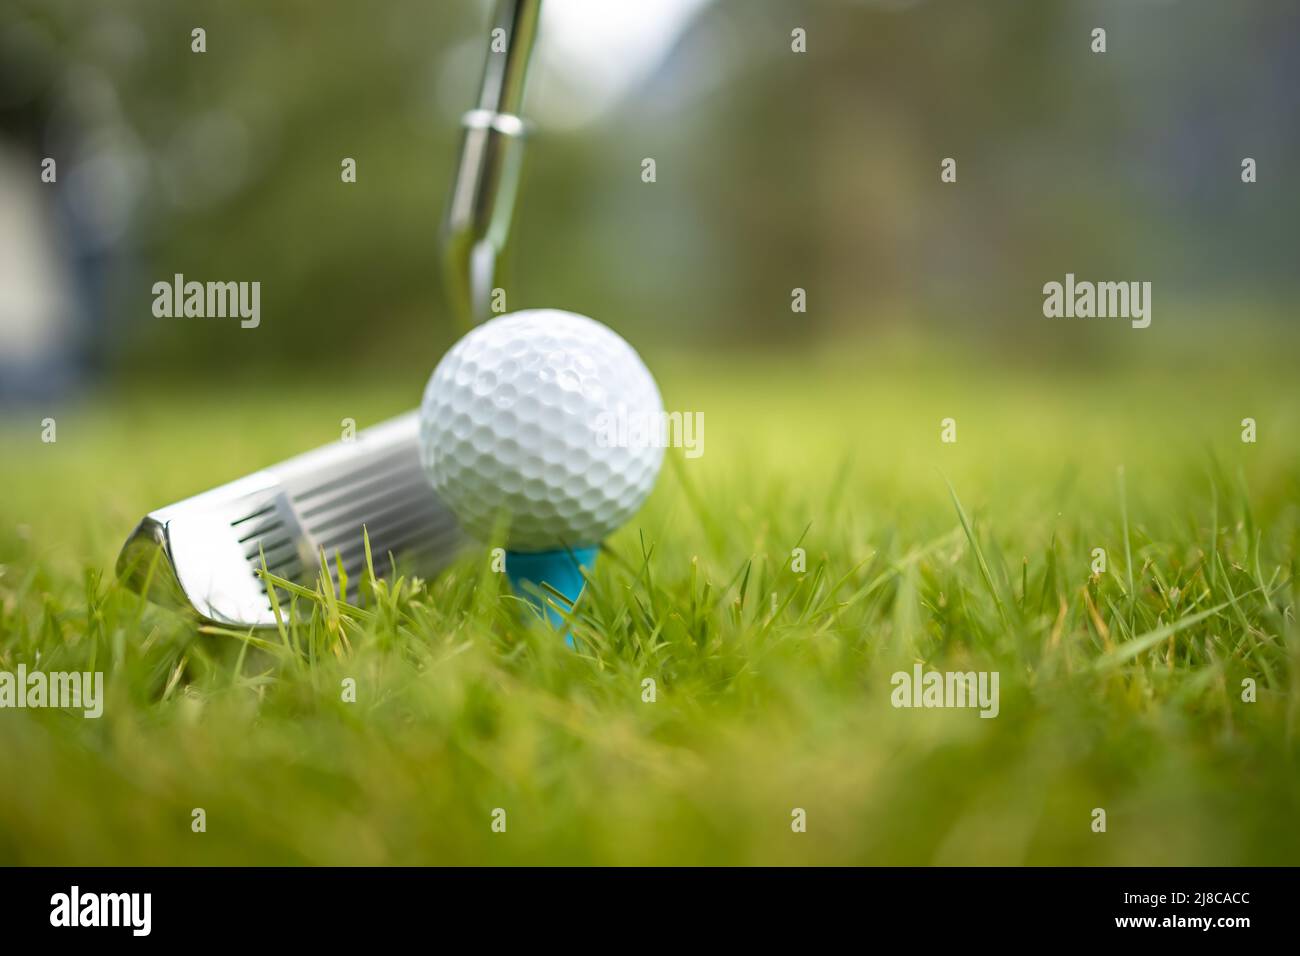 Golf club and ball on tee in front of driver Stock Photo